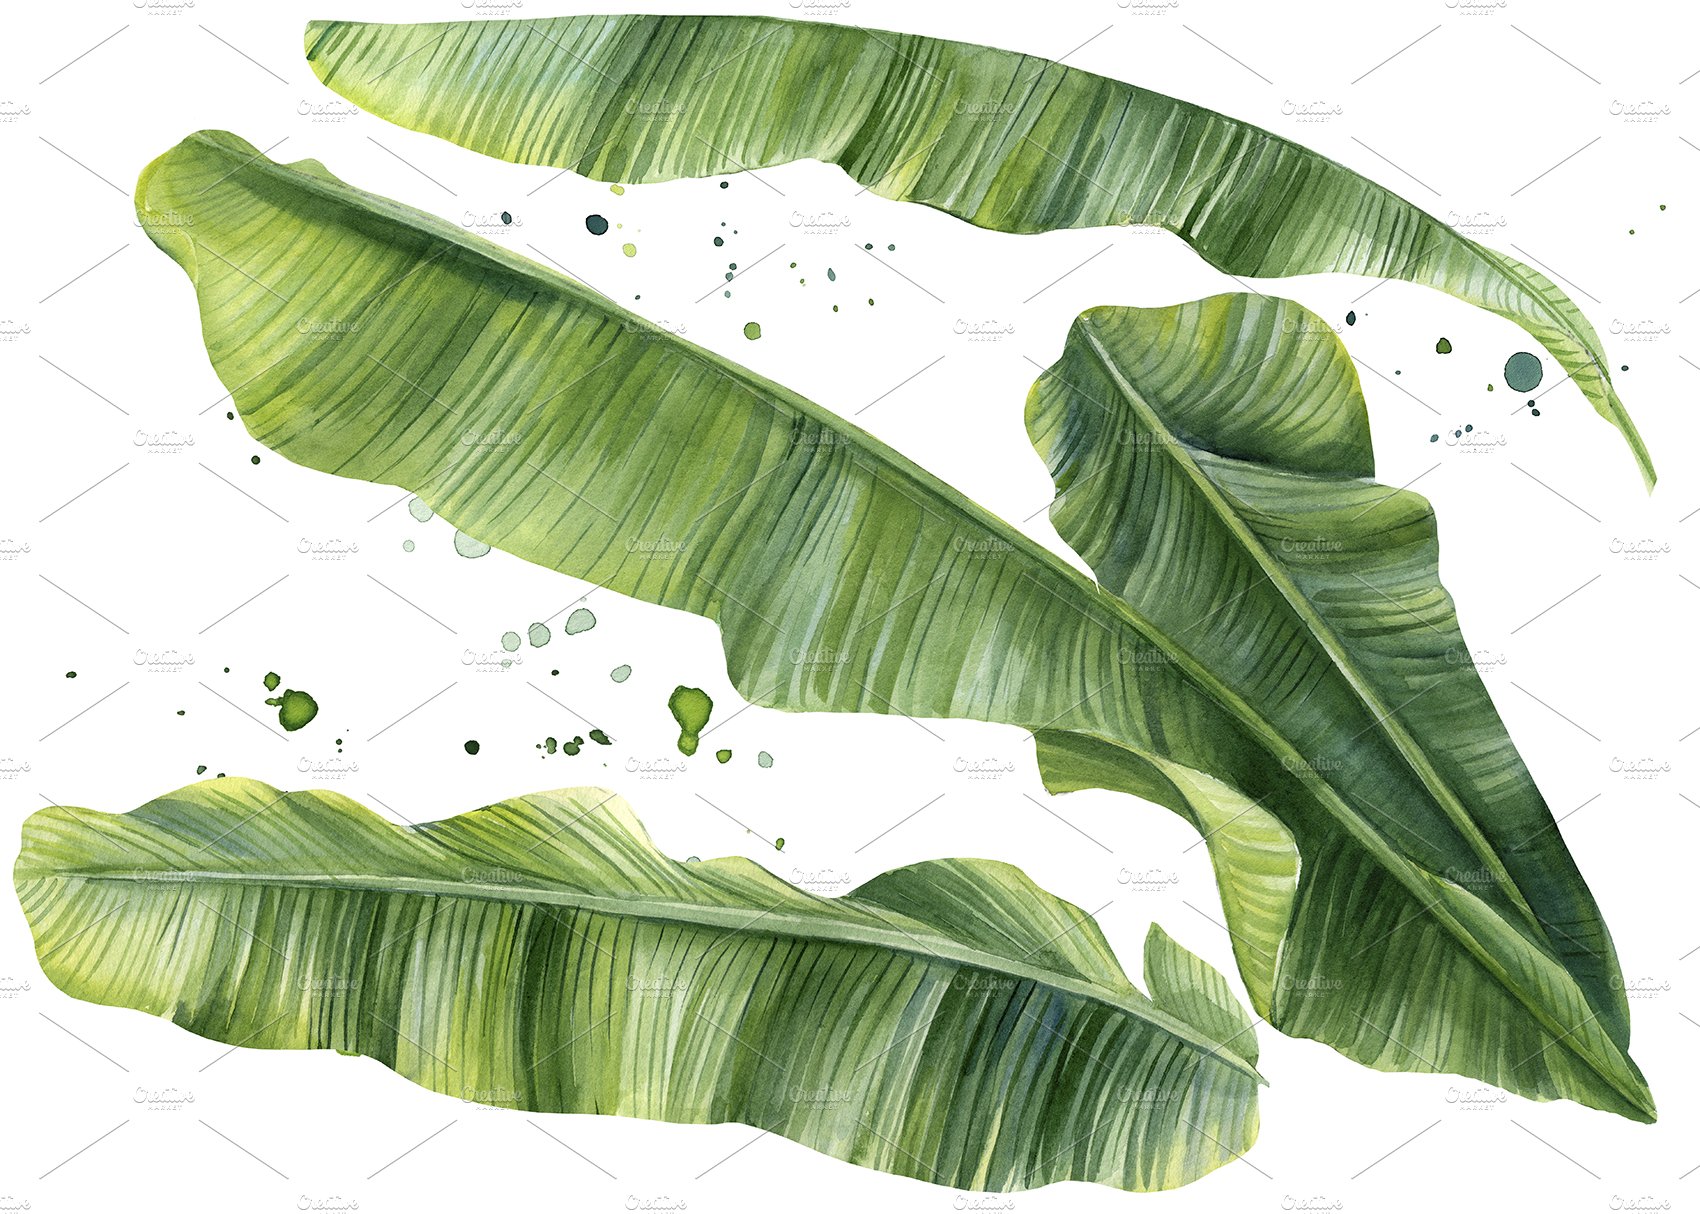 Watercolor painting of a banana leaf.